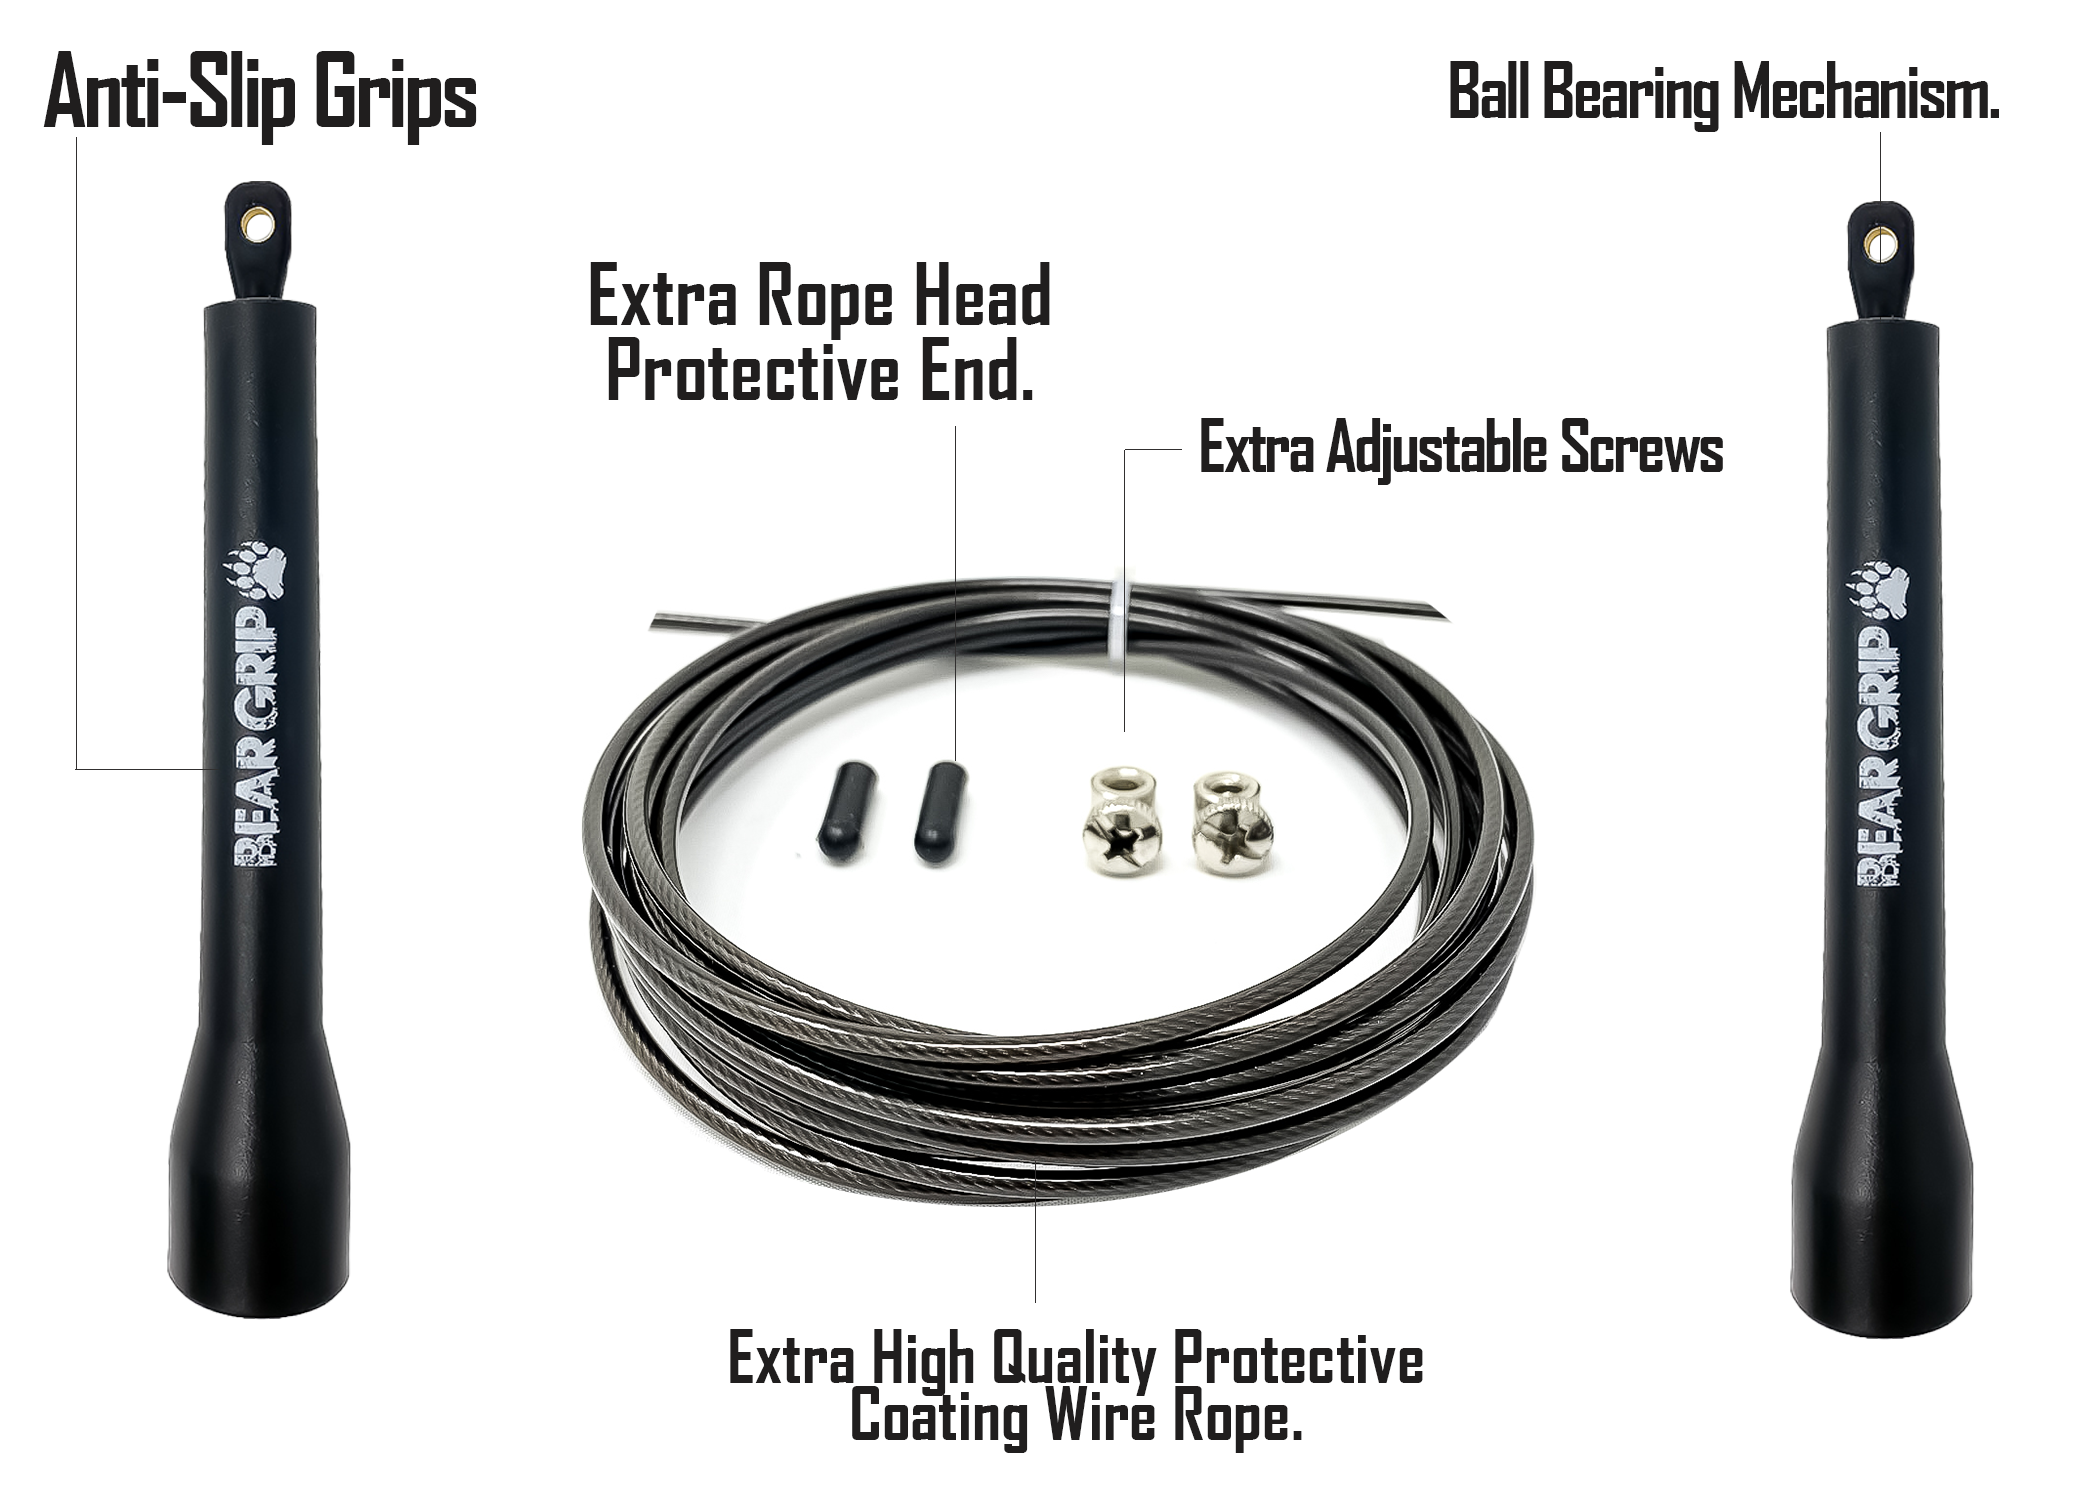 BEAR GRIP - ELITE SPEED SKIPPING ROPE FOR FITNESS CONDITIONING AND FAT LOSS